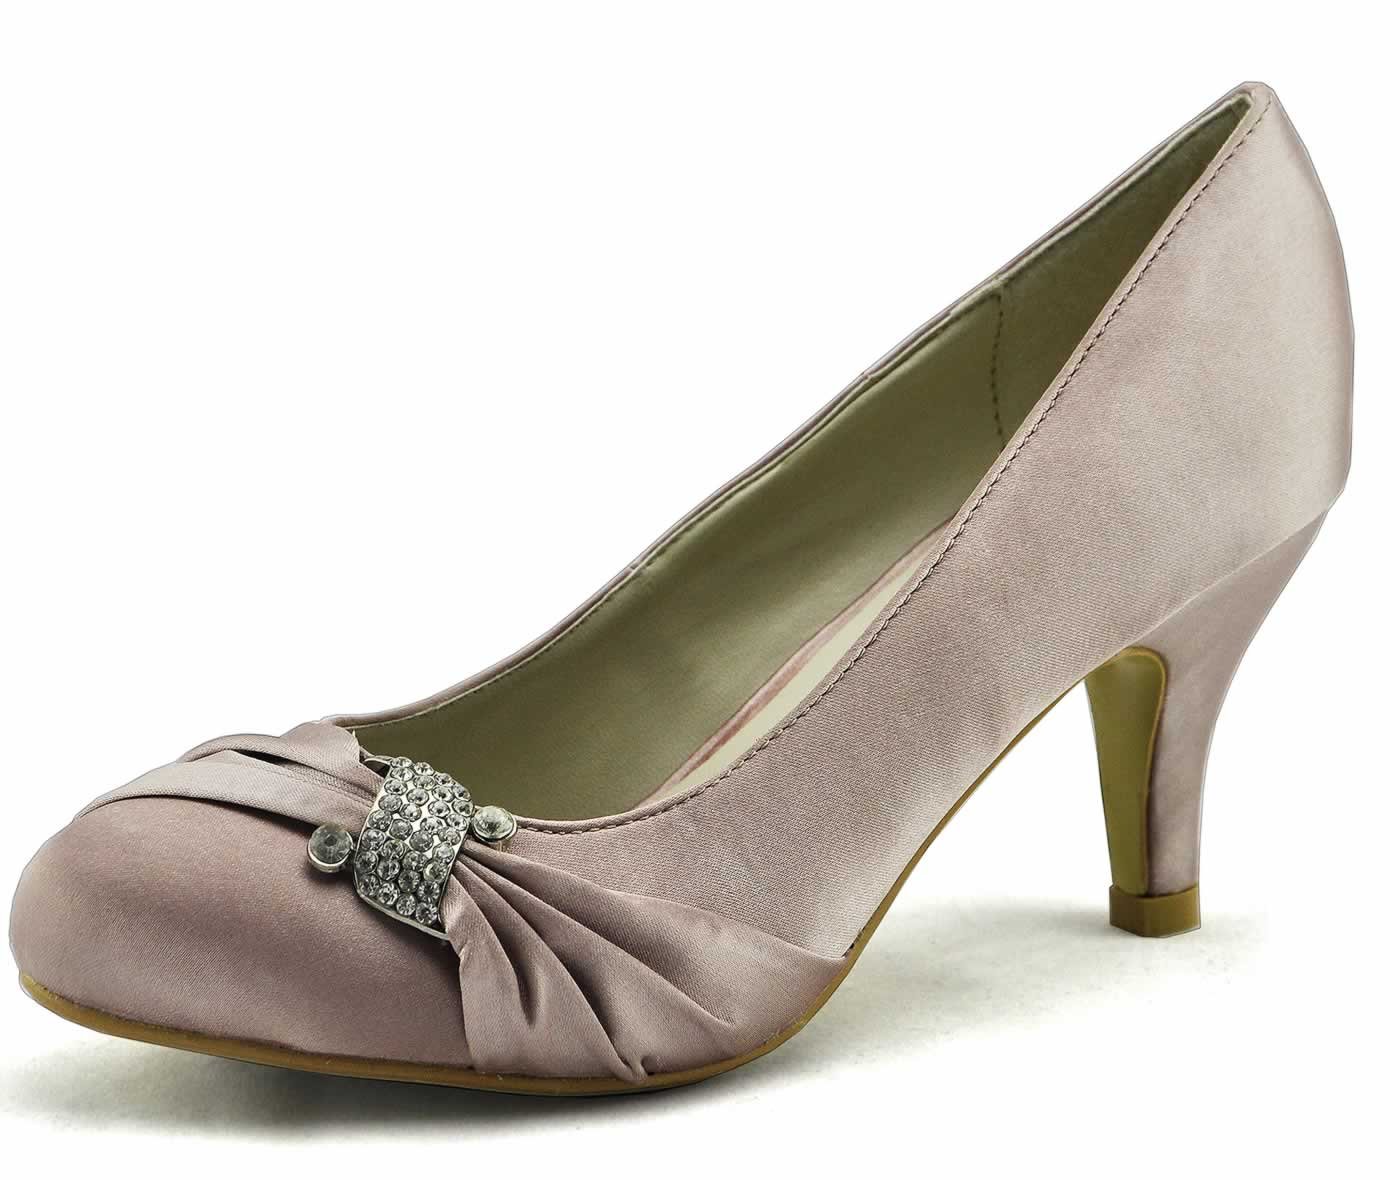 Nude Satin Shoes 79